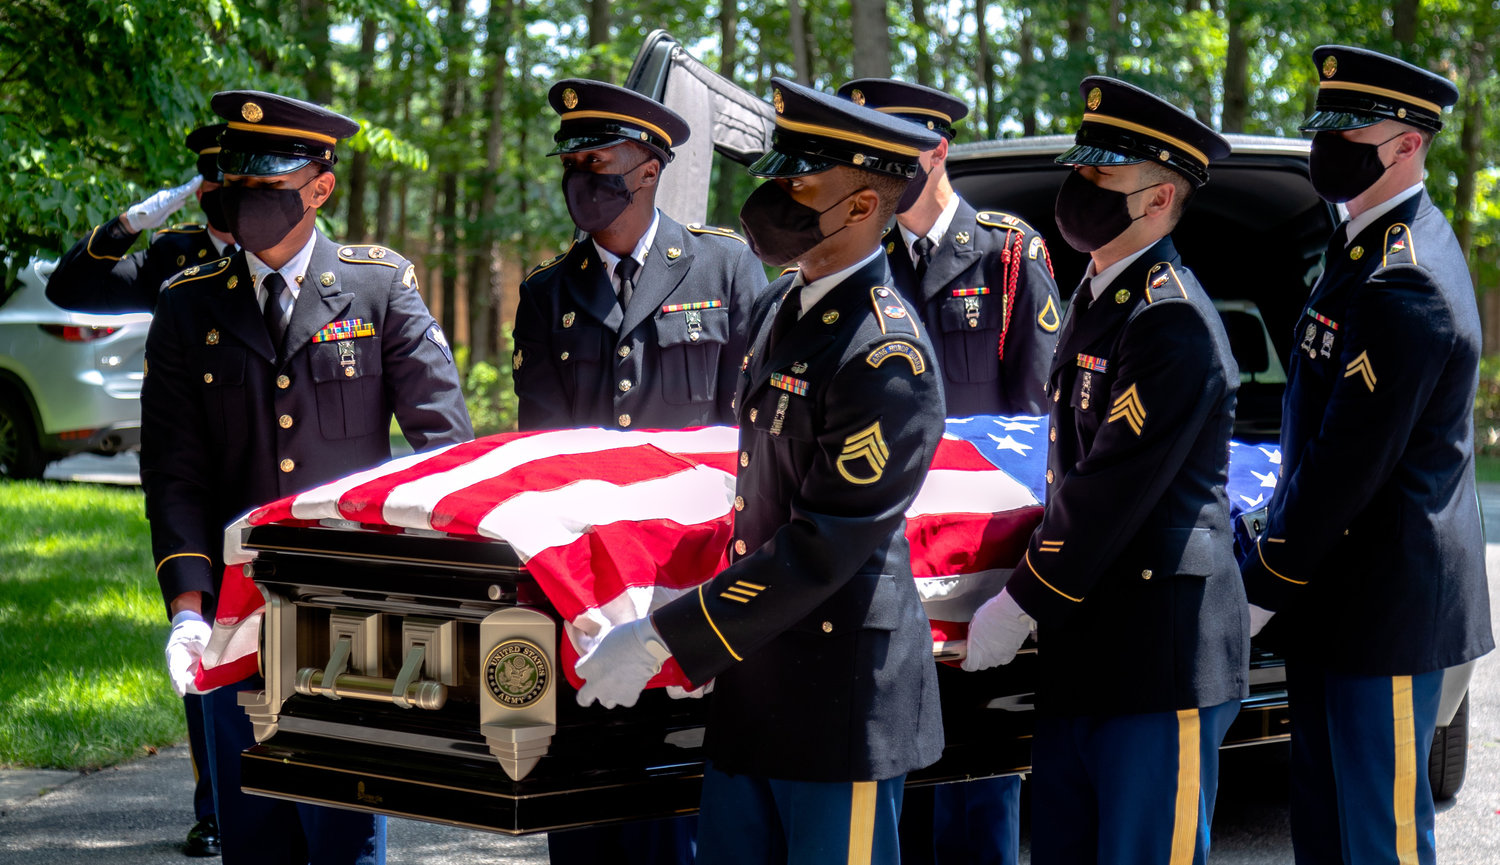 MILITARY FUNERAL SERVICE — Members of the New York Army National Guard Honor Guard carry the casket of Army National Guard Sgt. 1st Class Henry Colon during military funeral services at Calverton National Cemetery in Wading River on July 7.